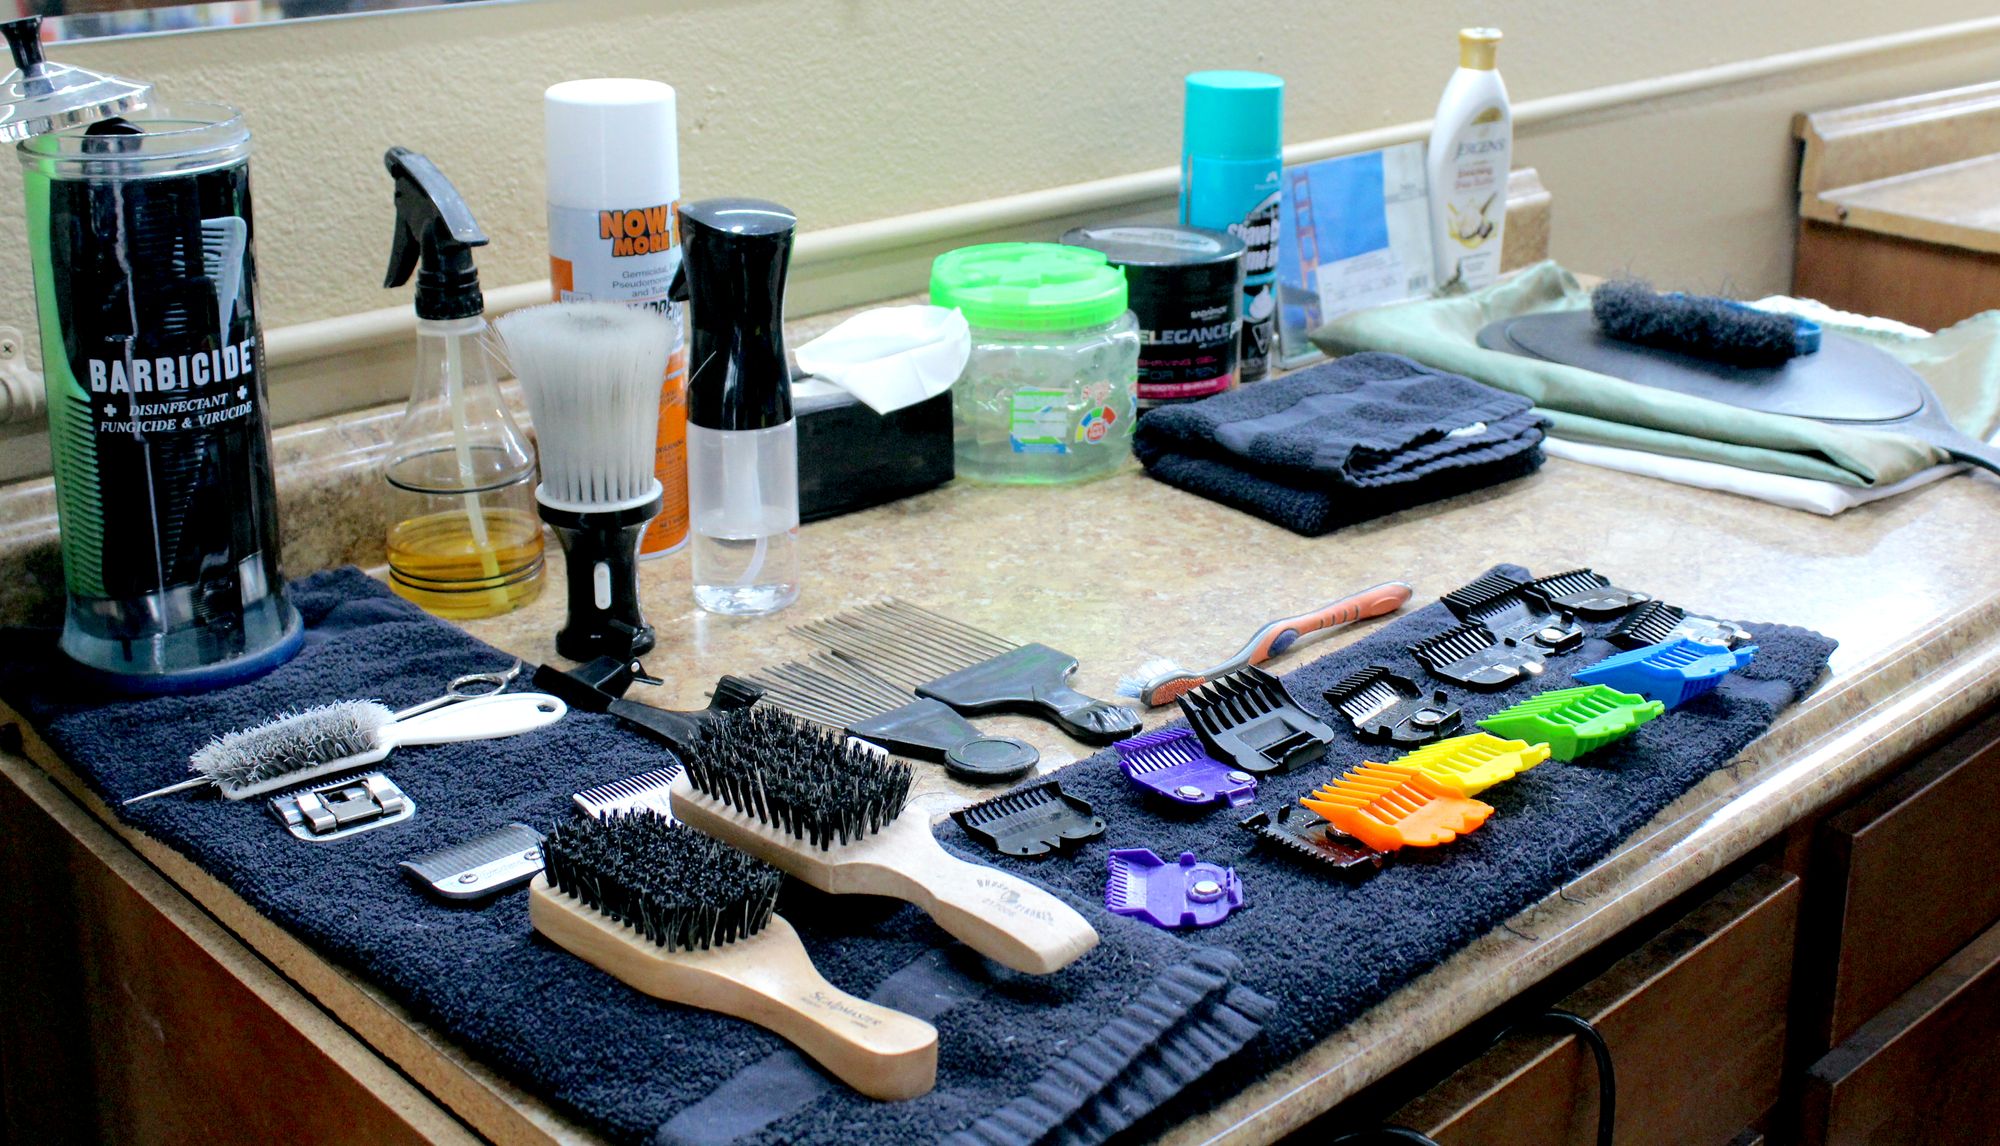 A variety of barber tools are organized neatly on two navy blue towels, including a tall jar of Barbicide with combs inside, 2 hairbrushes, a whisk-type brush, several jars and spray containers and 2 rows of trimming attachments in purple, orange, green, yellow, blue and black.